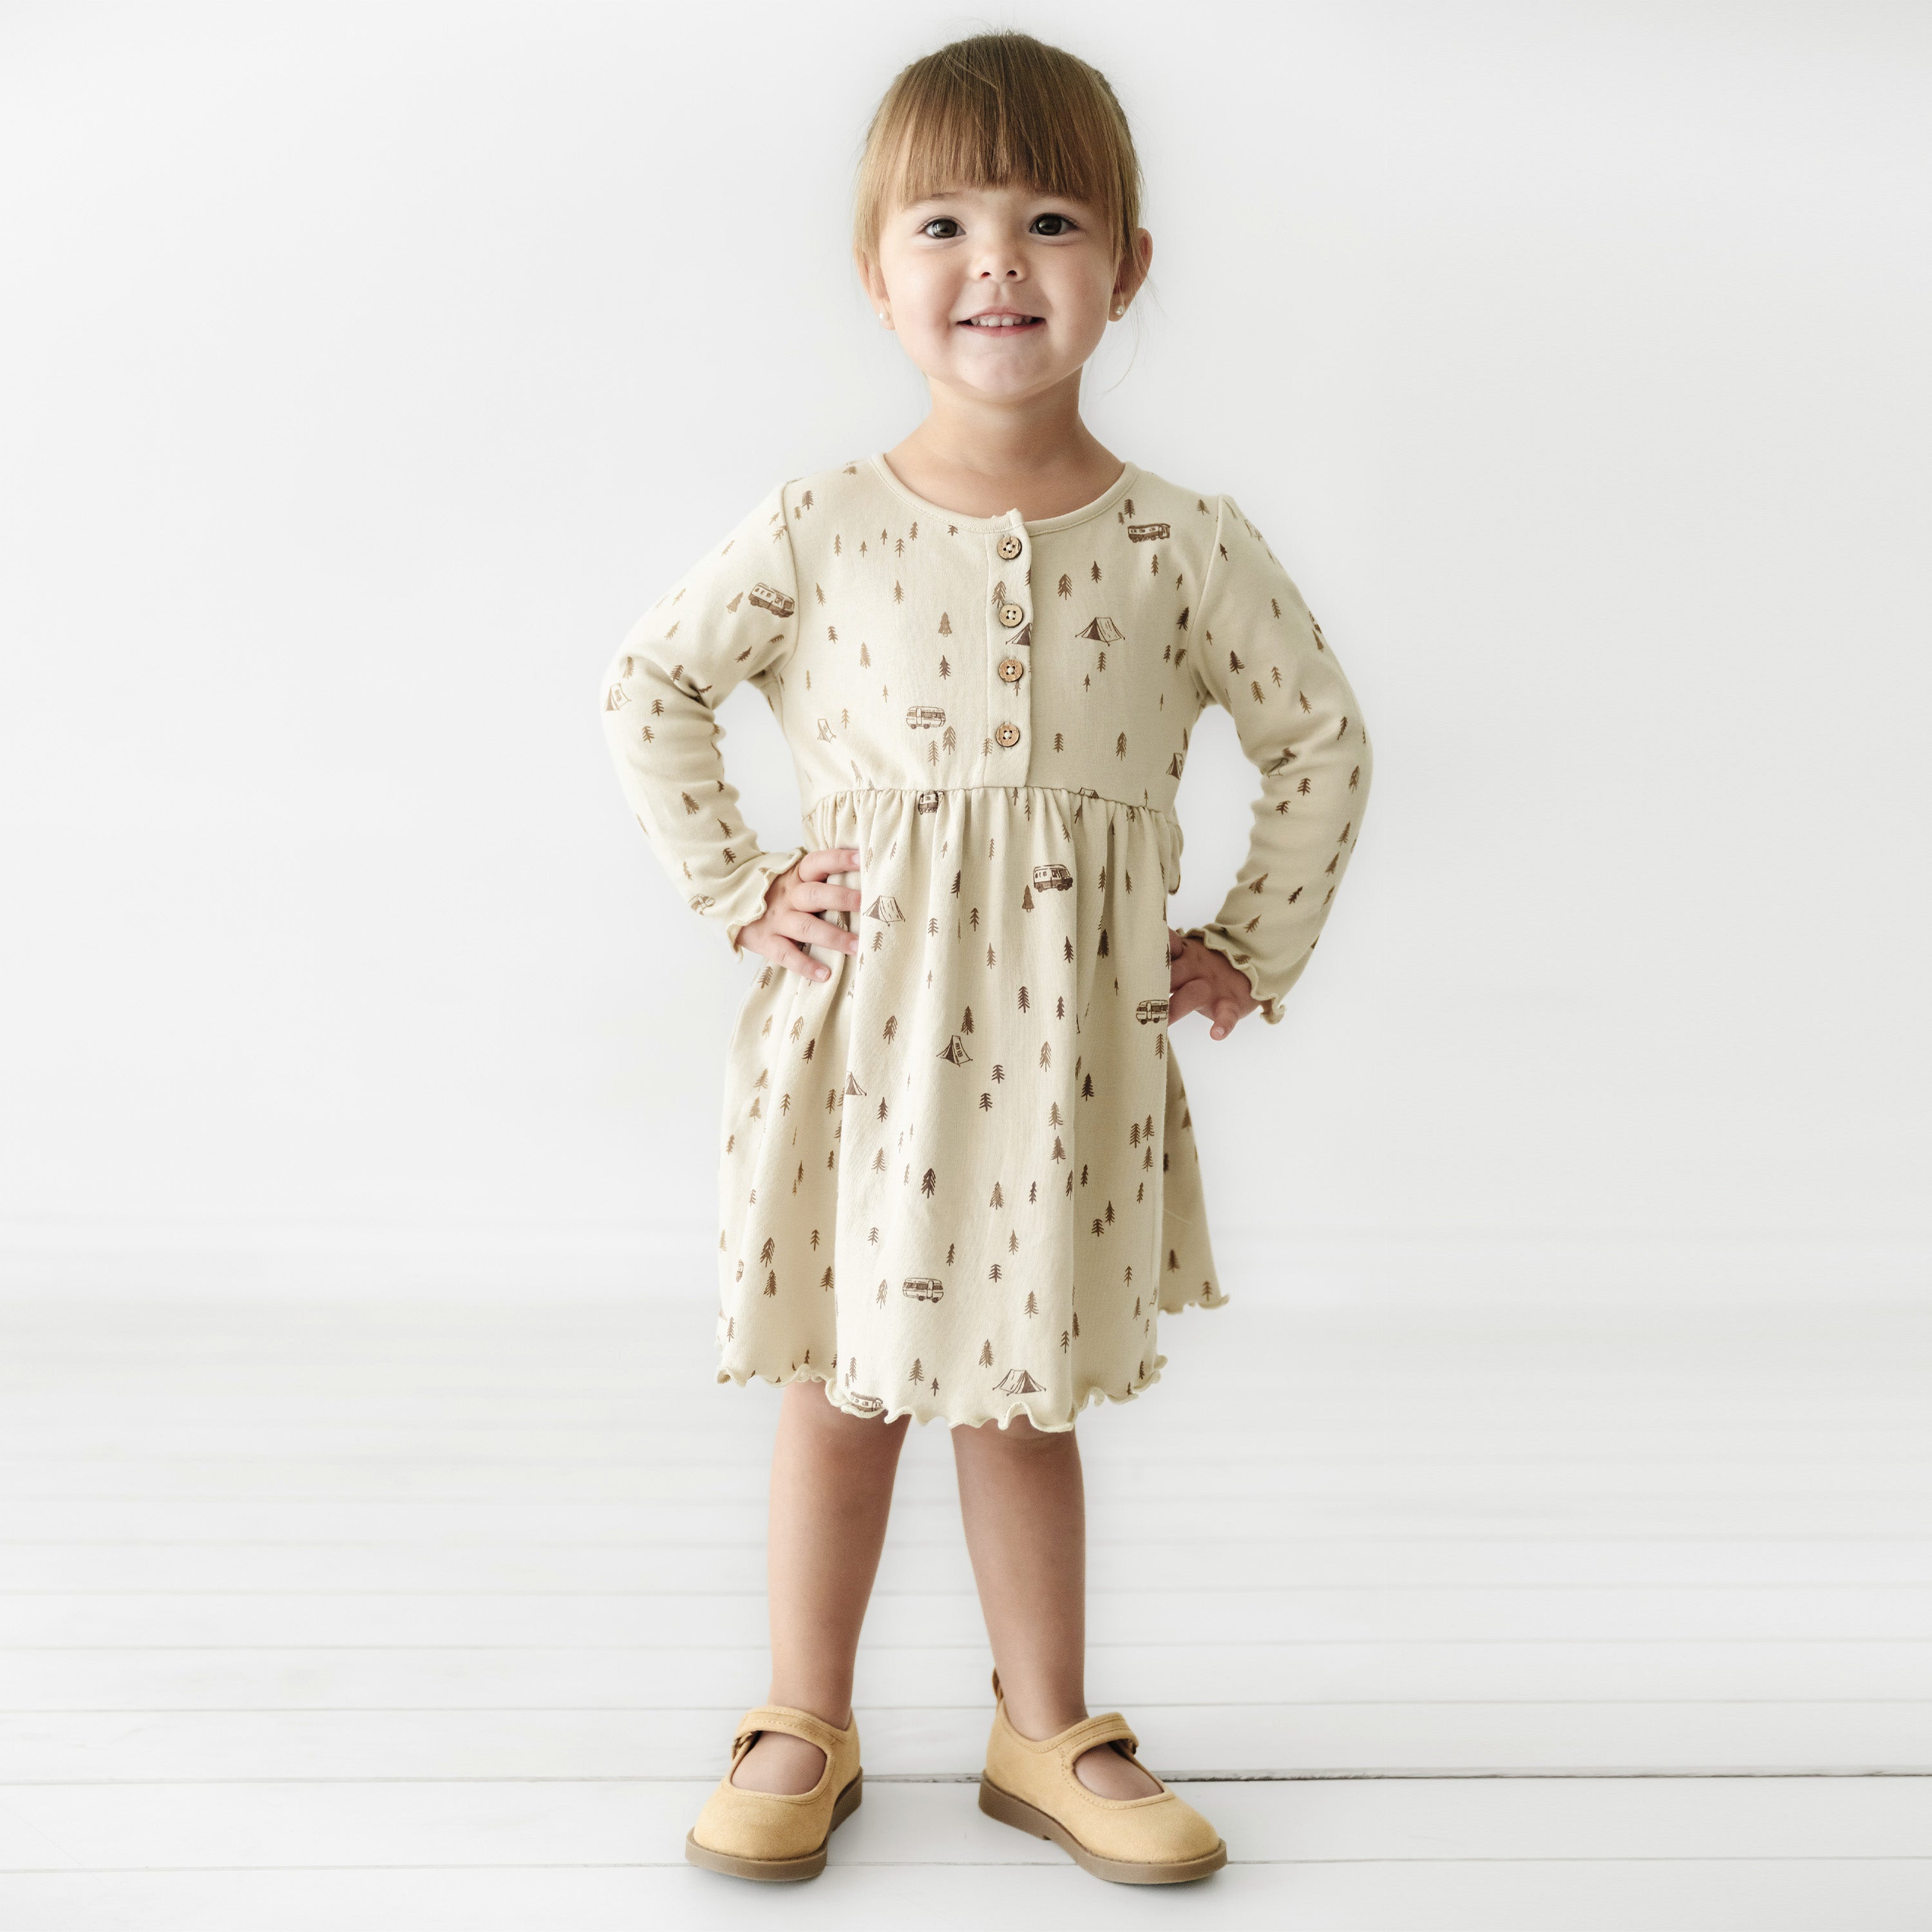 A young girl with light brown hair smiles and stands confidently, wearing an Organic Baby Camplife Long Sleeve Twirl Dress adorned with whimsical prints from Makemake Organics and brown mary jane shoes against a white background.